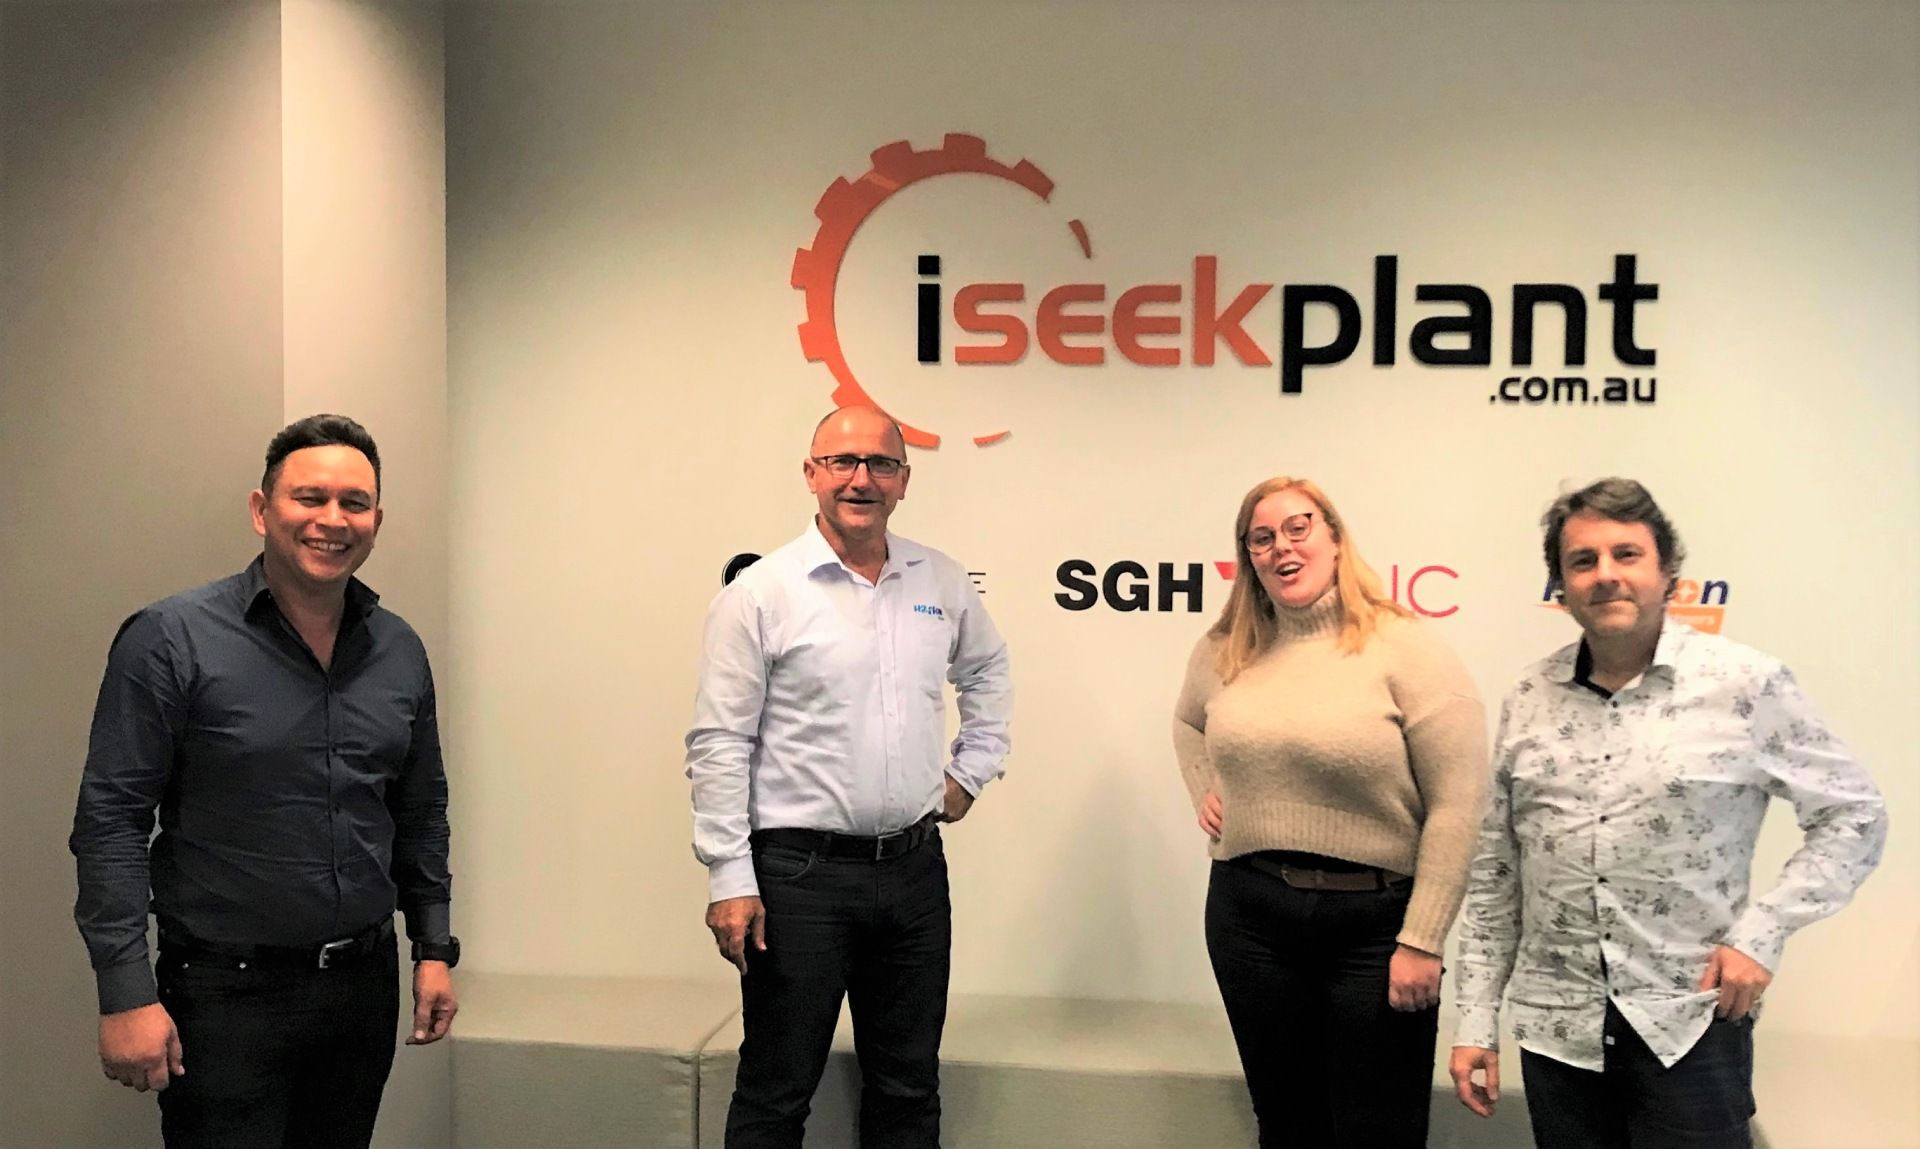 Launching our new website with iSeekplant